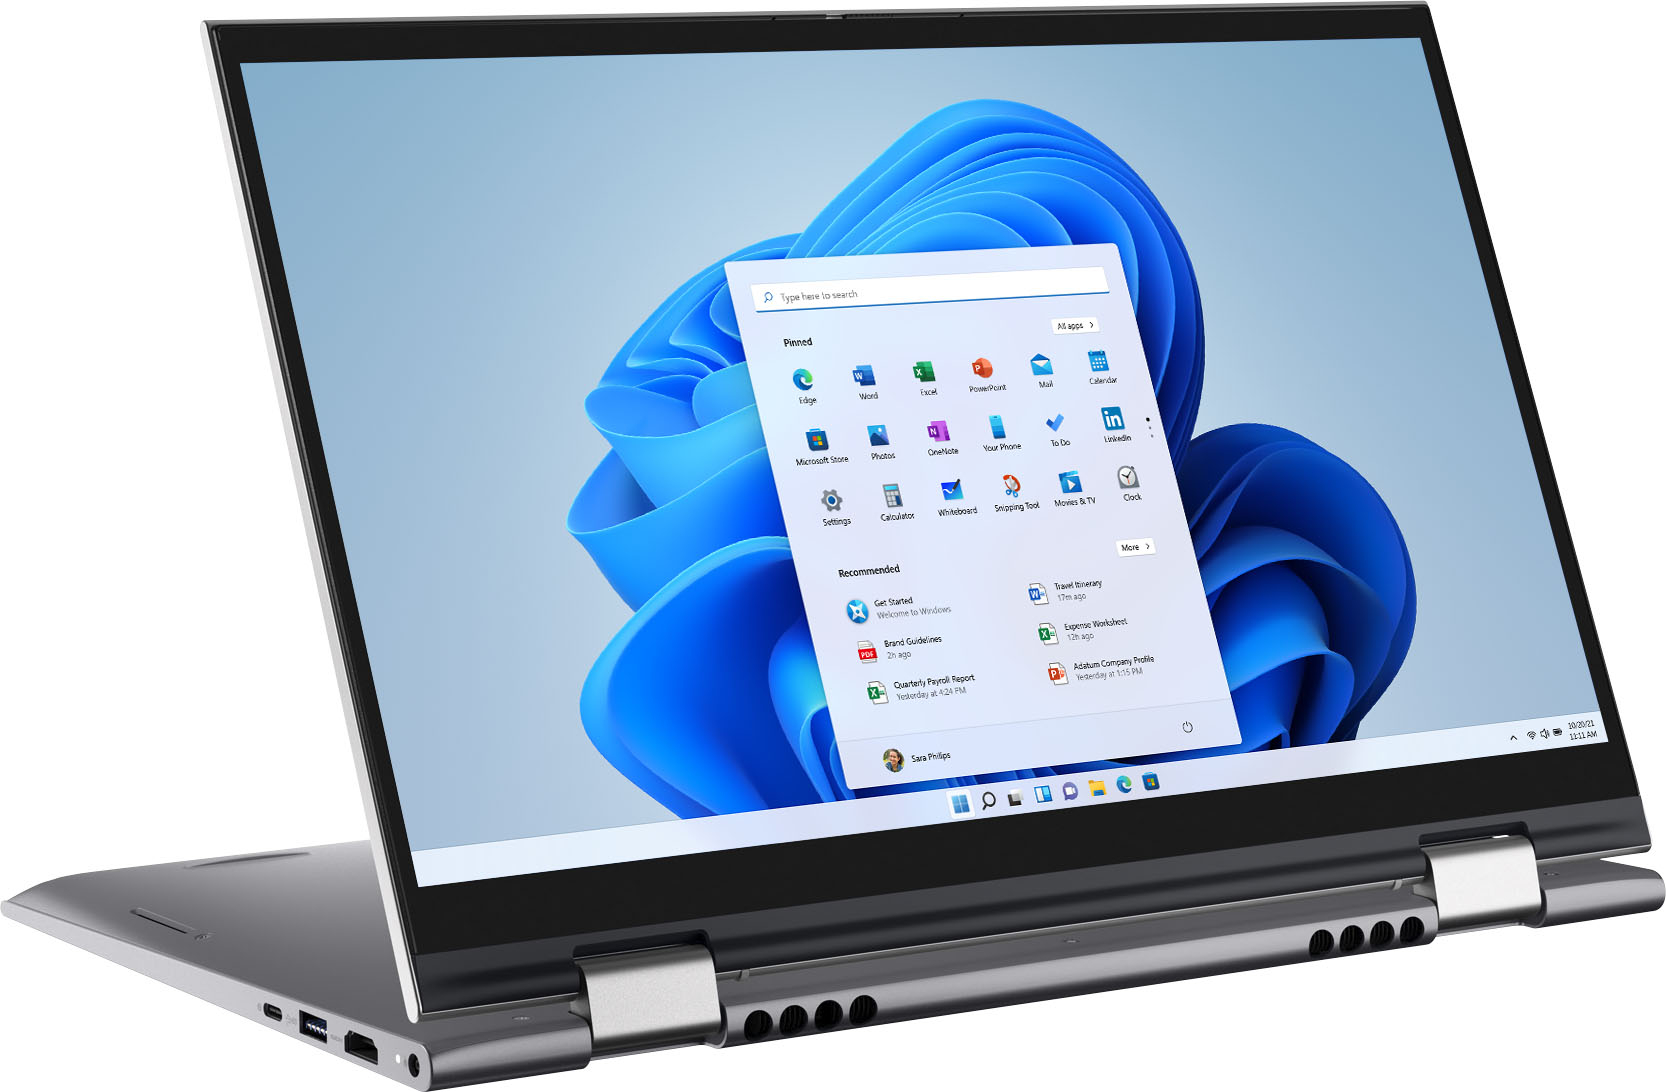 14" Dell Inspiron Touch-Screen 2-in-1 Laptop: Intel Core i5-1155G7, 8GB DDR4, 512GB PCIe SSD (Silver) $600 + Free Shipping